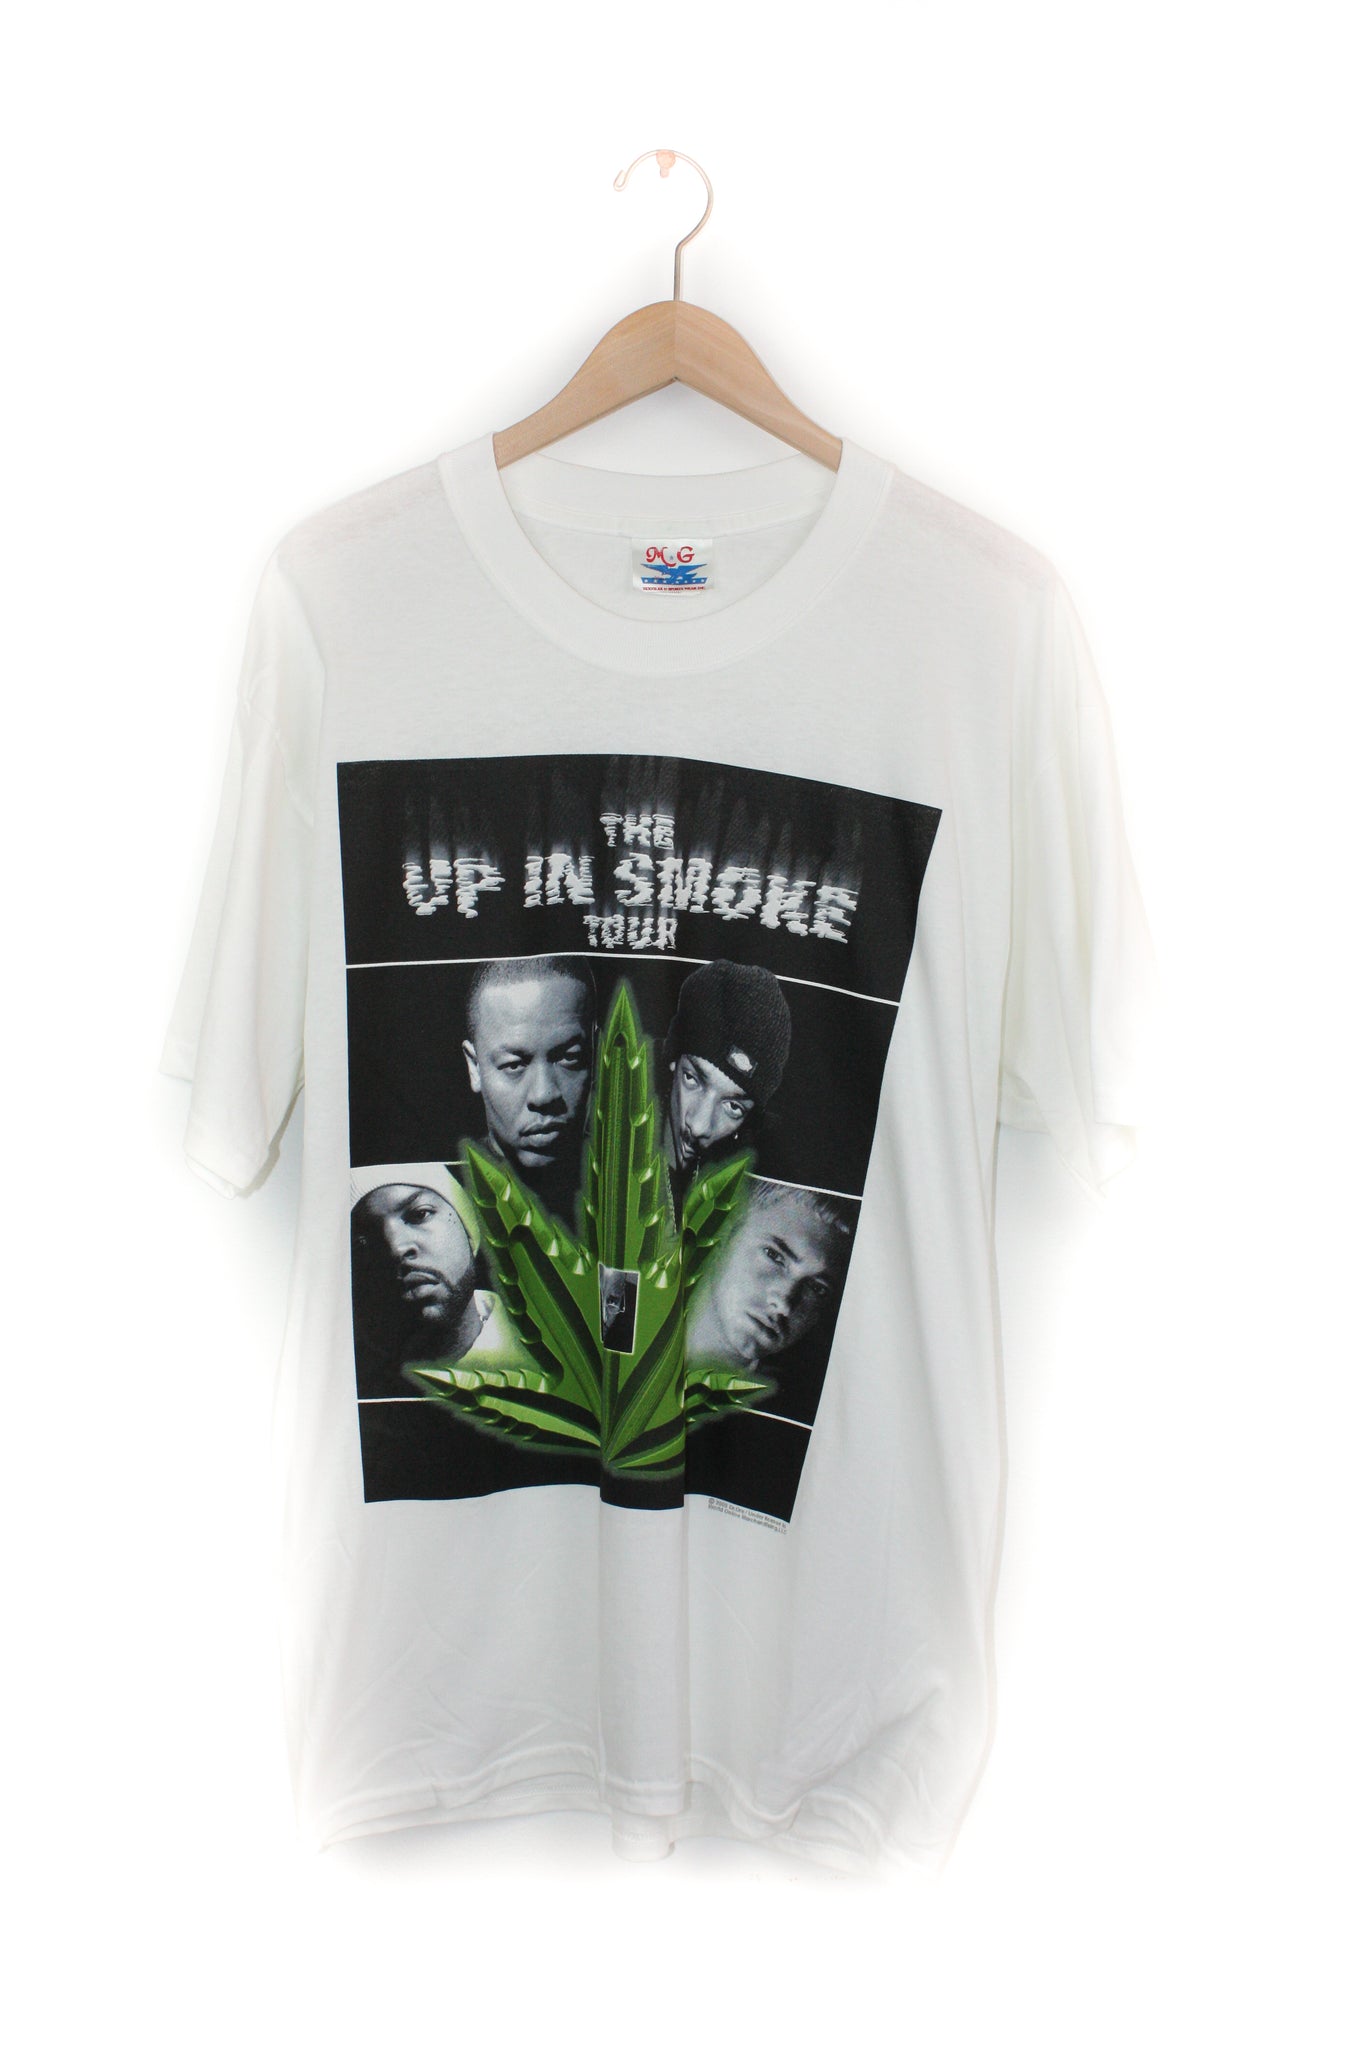 UP IN SMOKE TOUR // DR DRE